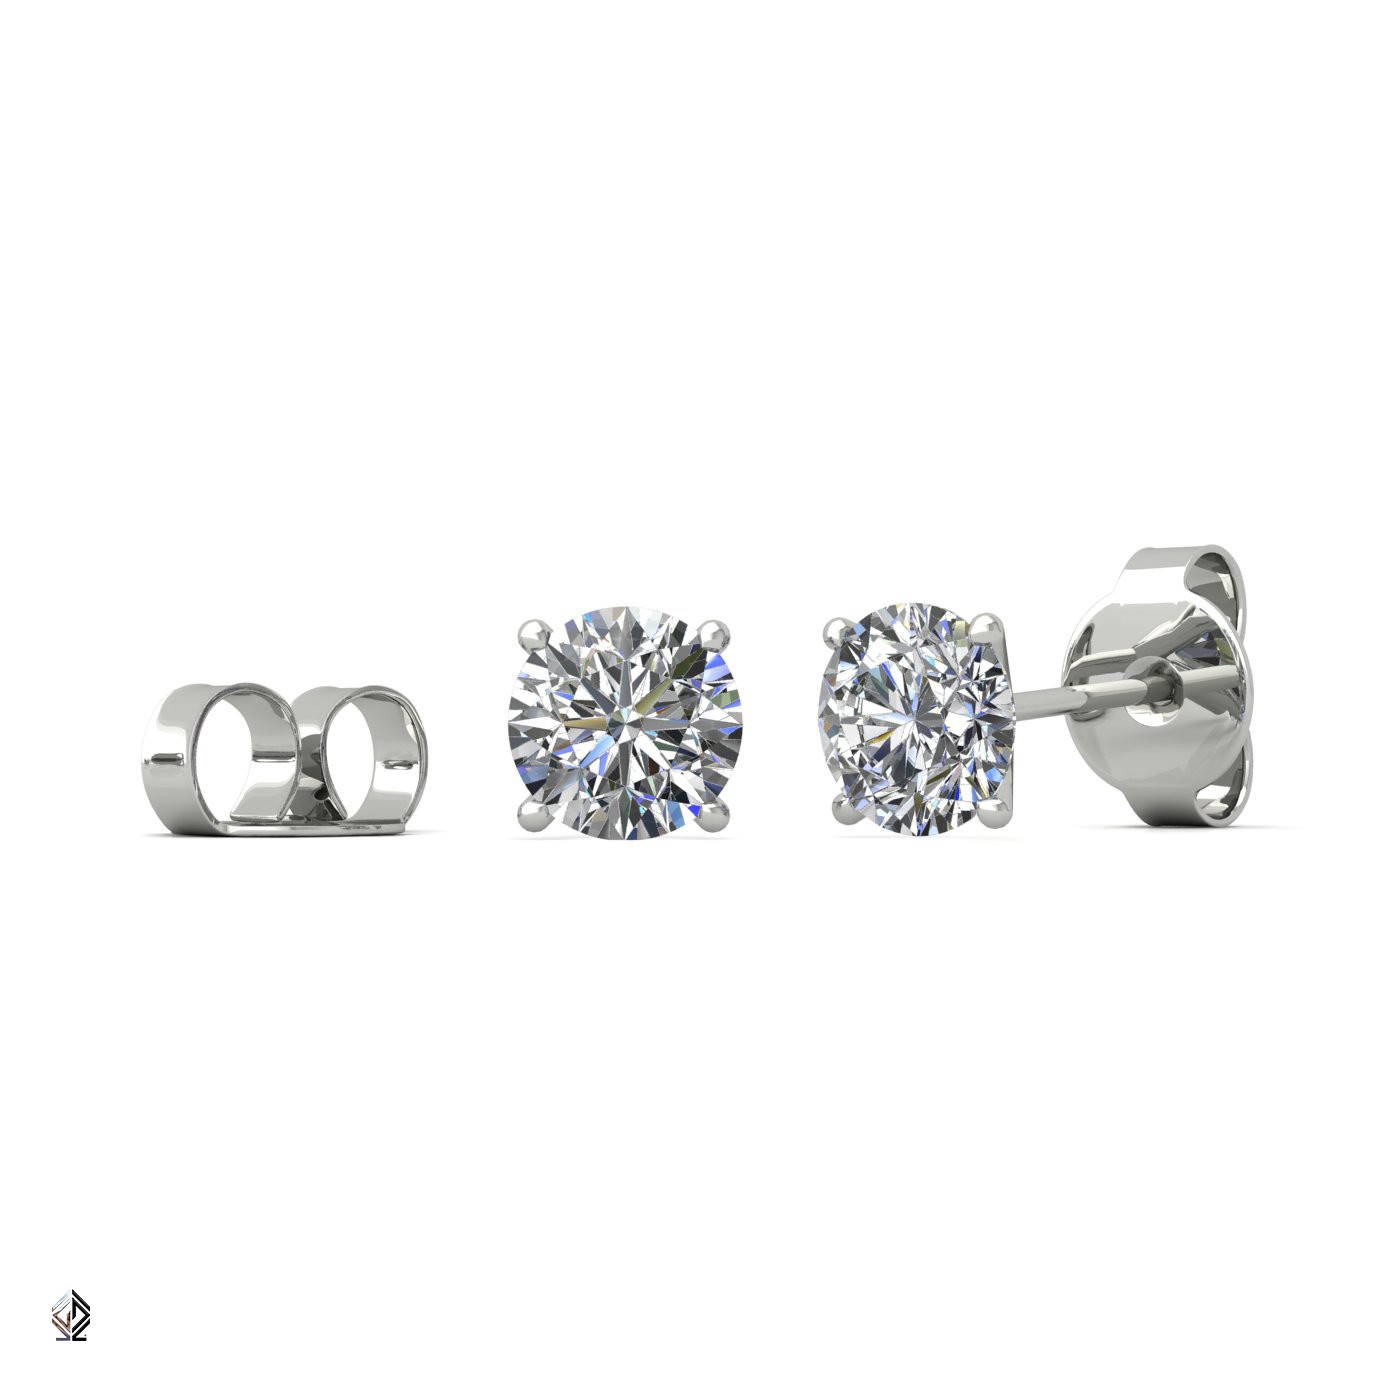 18k white gold 1.0 ct each (2,0 tcw) 4 prongs round cut classic diamond earring studs Photos & images